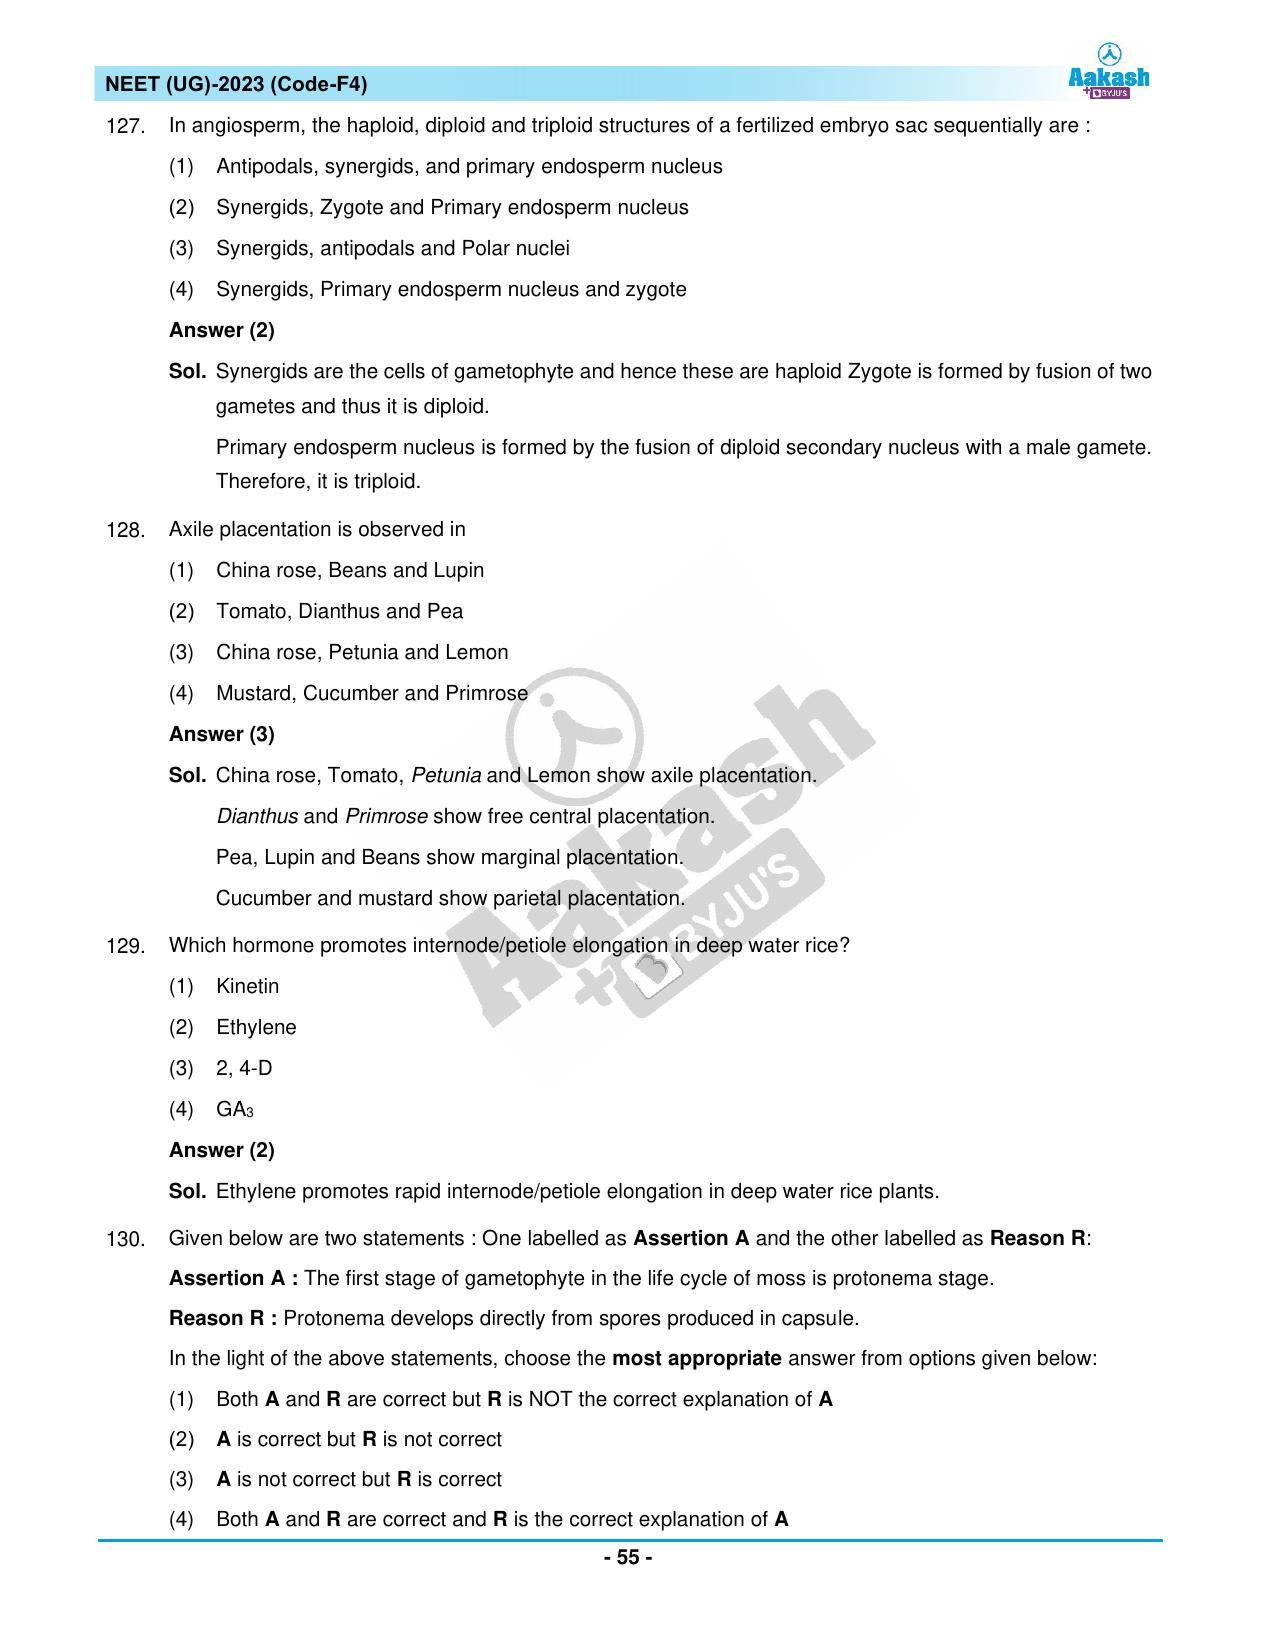 NEET 2023 Question Paper F4 - Page 55